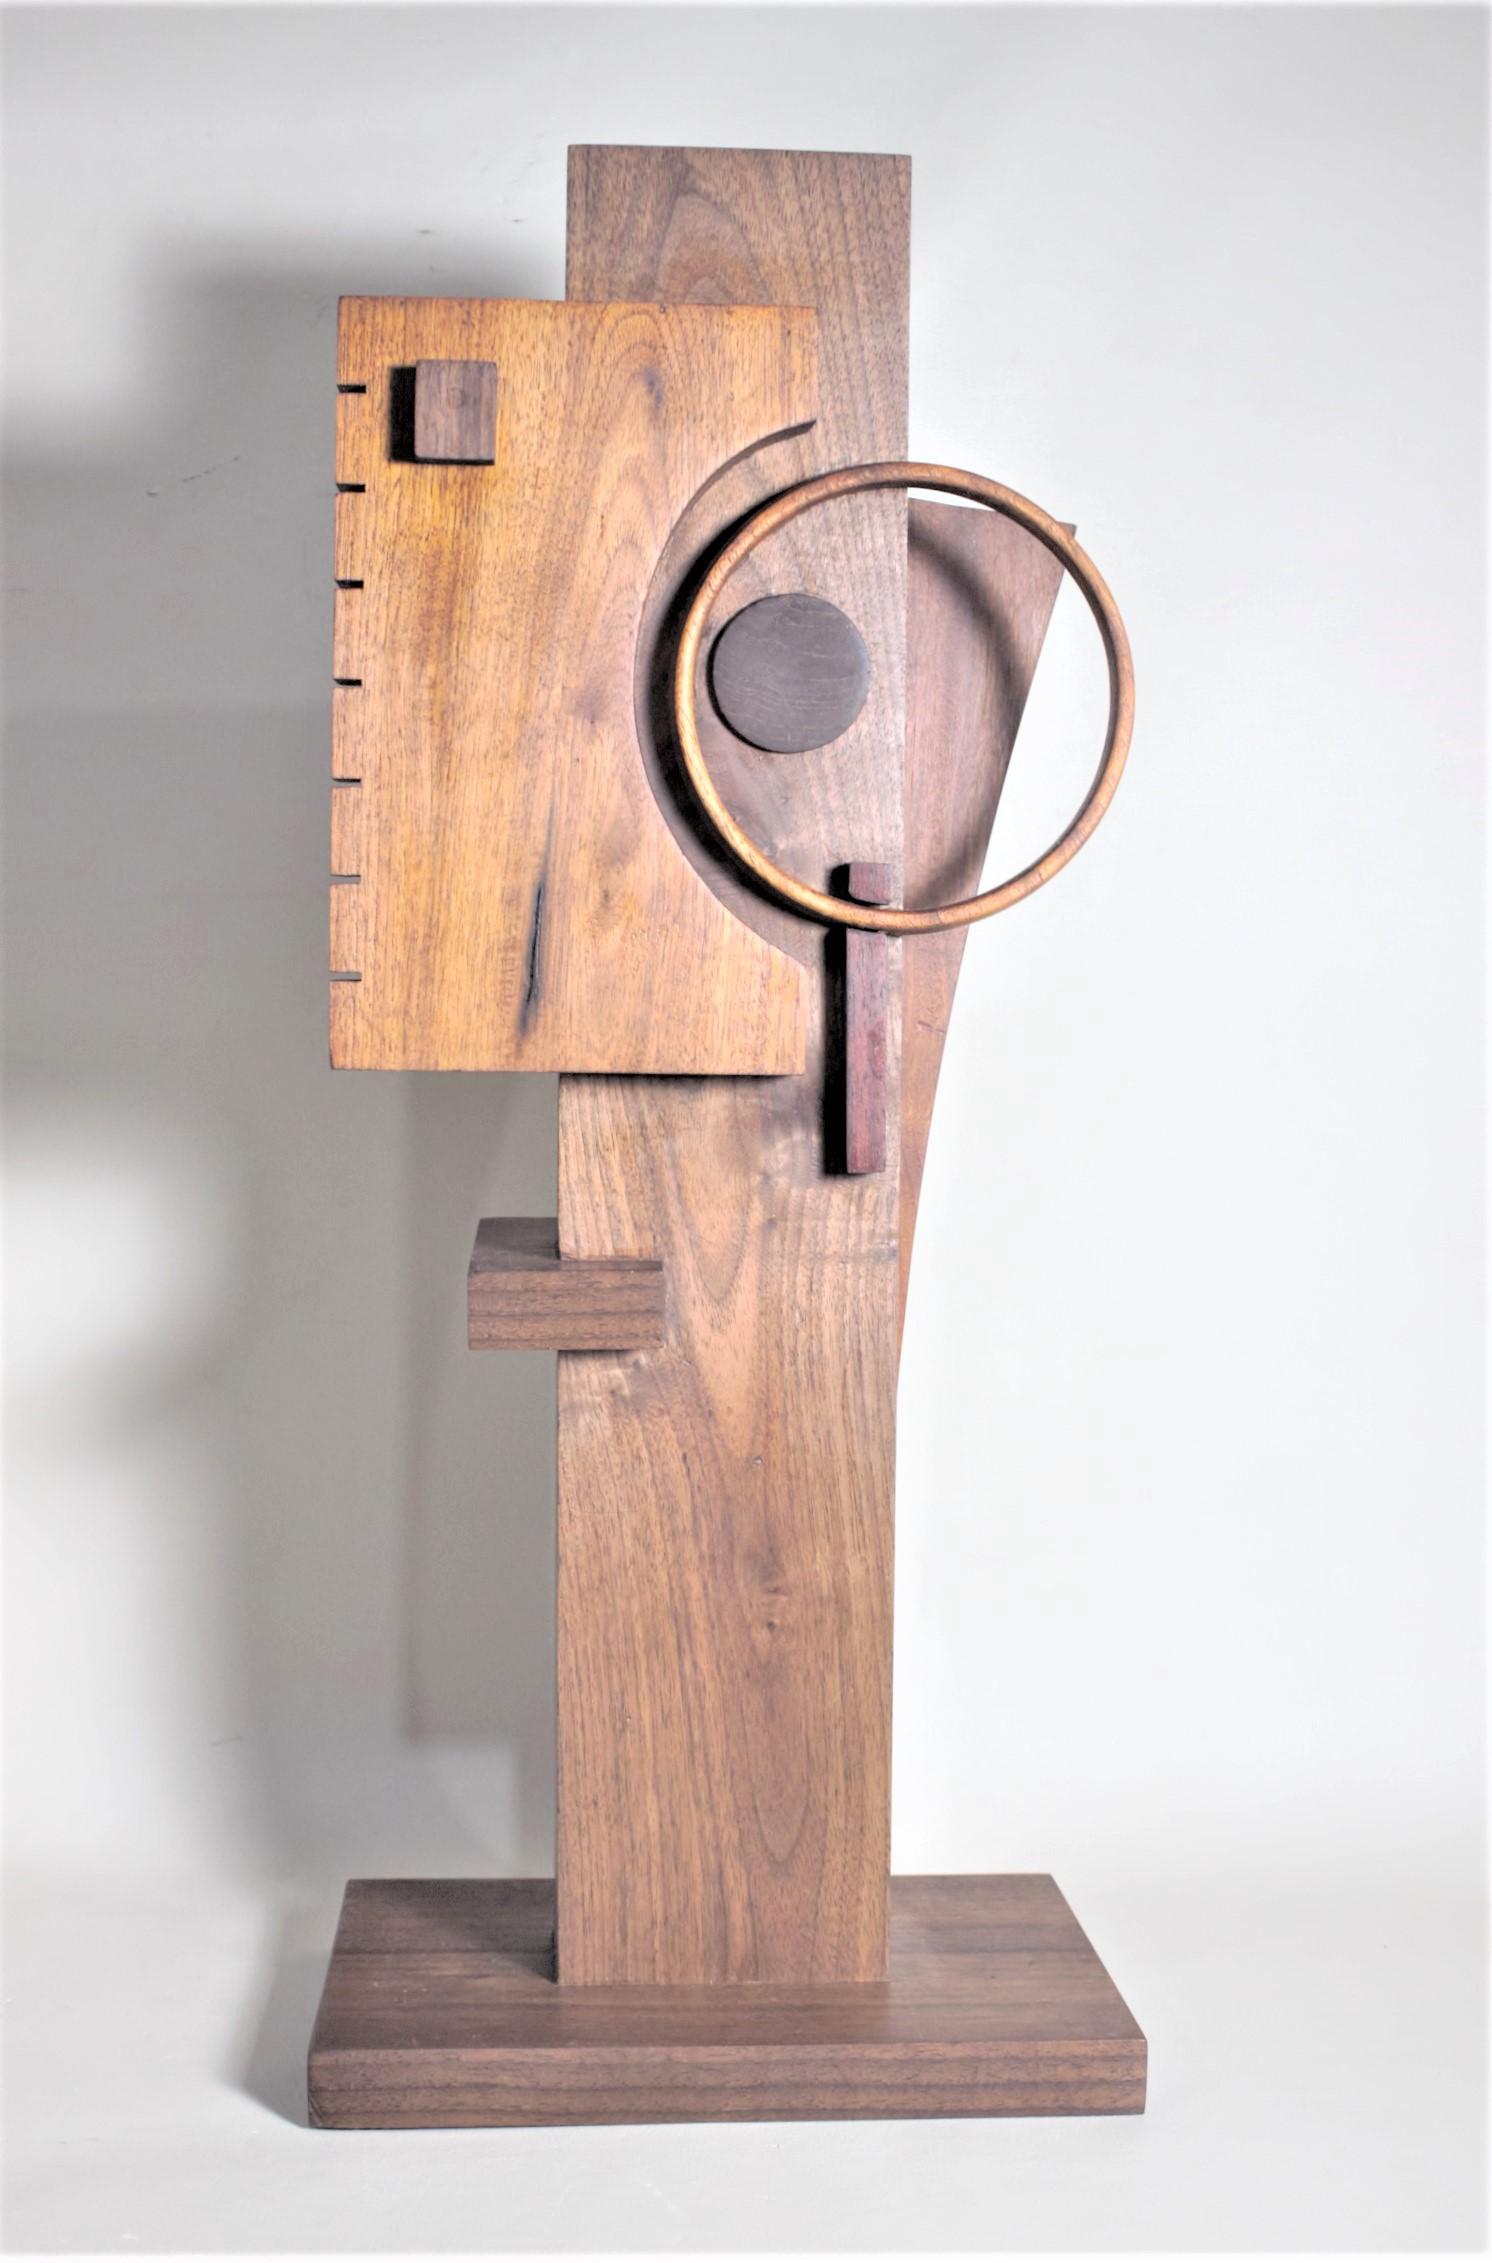 This contemporary abstract wooden sculpture was done by Czeslaw Budny a Polish-Canadian artist in the Constructivist style in circa 2010. This sculpture was made entirely of up-cycled, reclaimed wood from a variety of sources and utilizes the